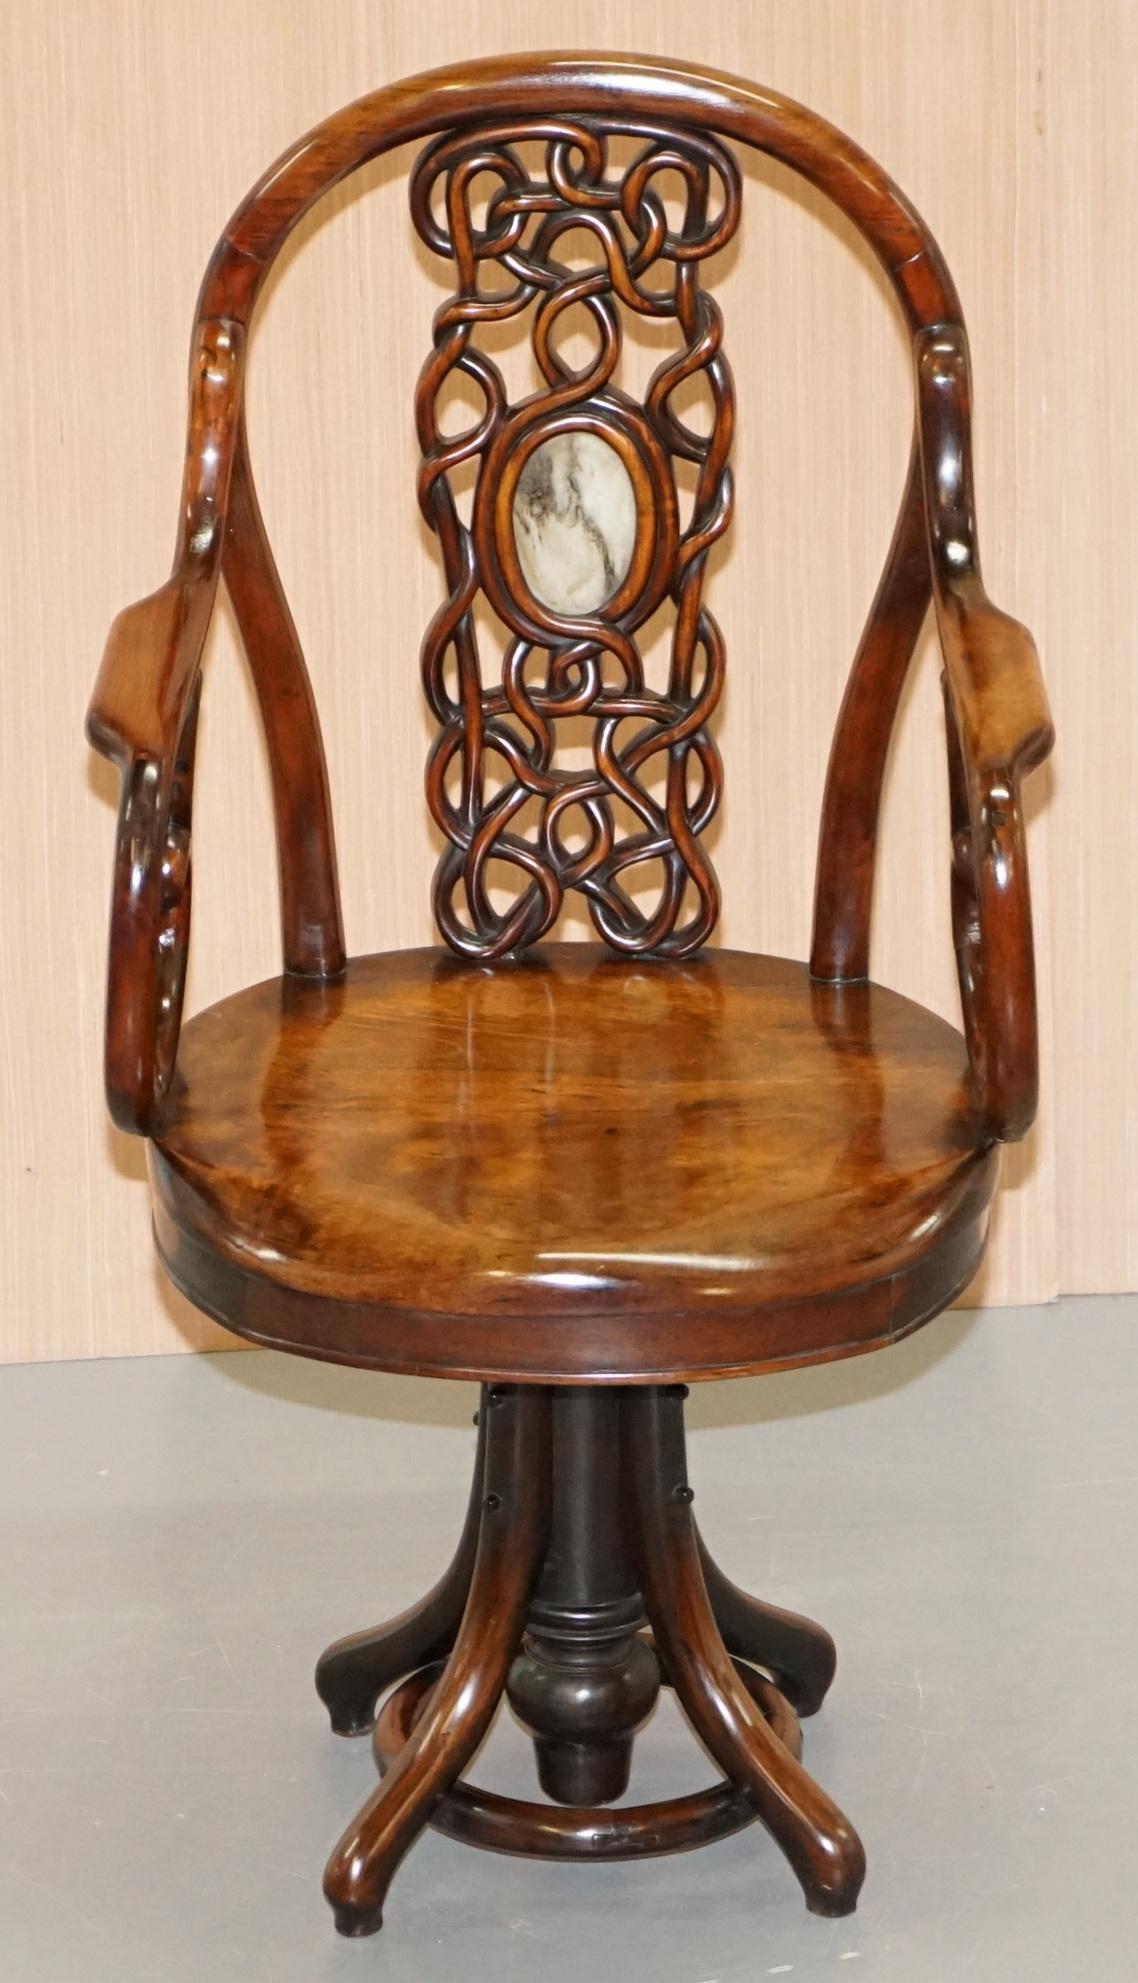 We are delighted to offer for sale this very rare fully restored Qing dynasty circa 1880 solid Rosewood with marble inset back piece fully restored captains swivel chair

A very good looking and well made chair, the timber is all solid Rosewood